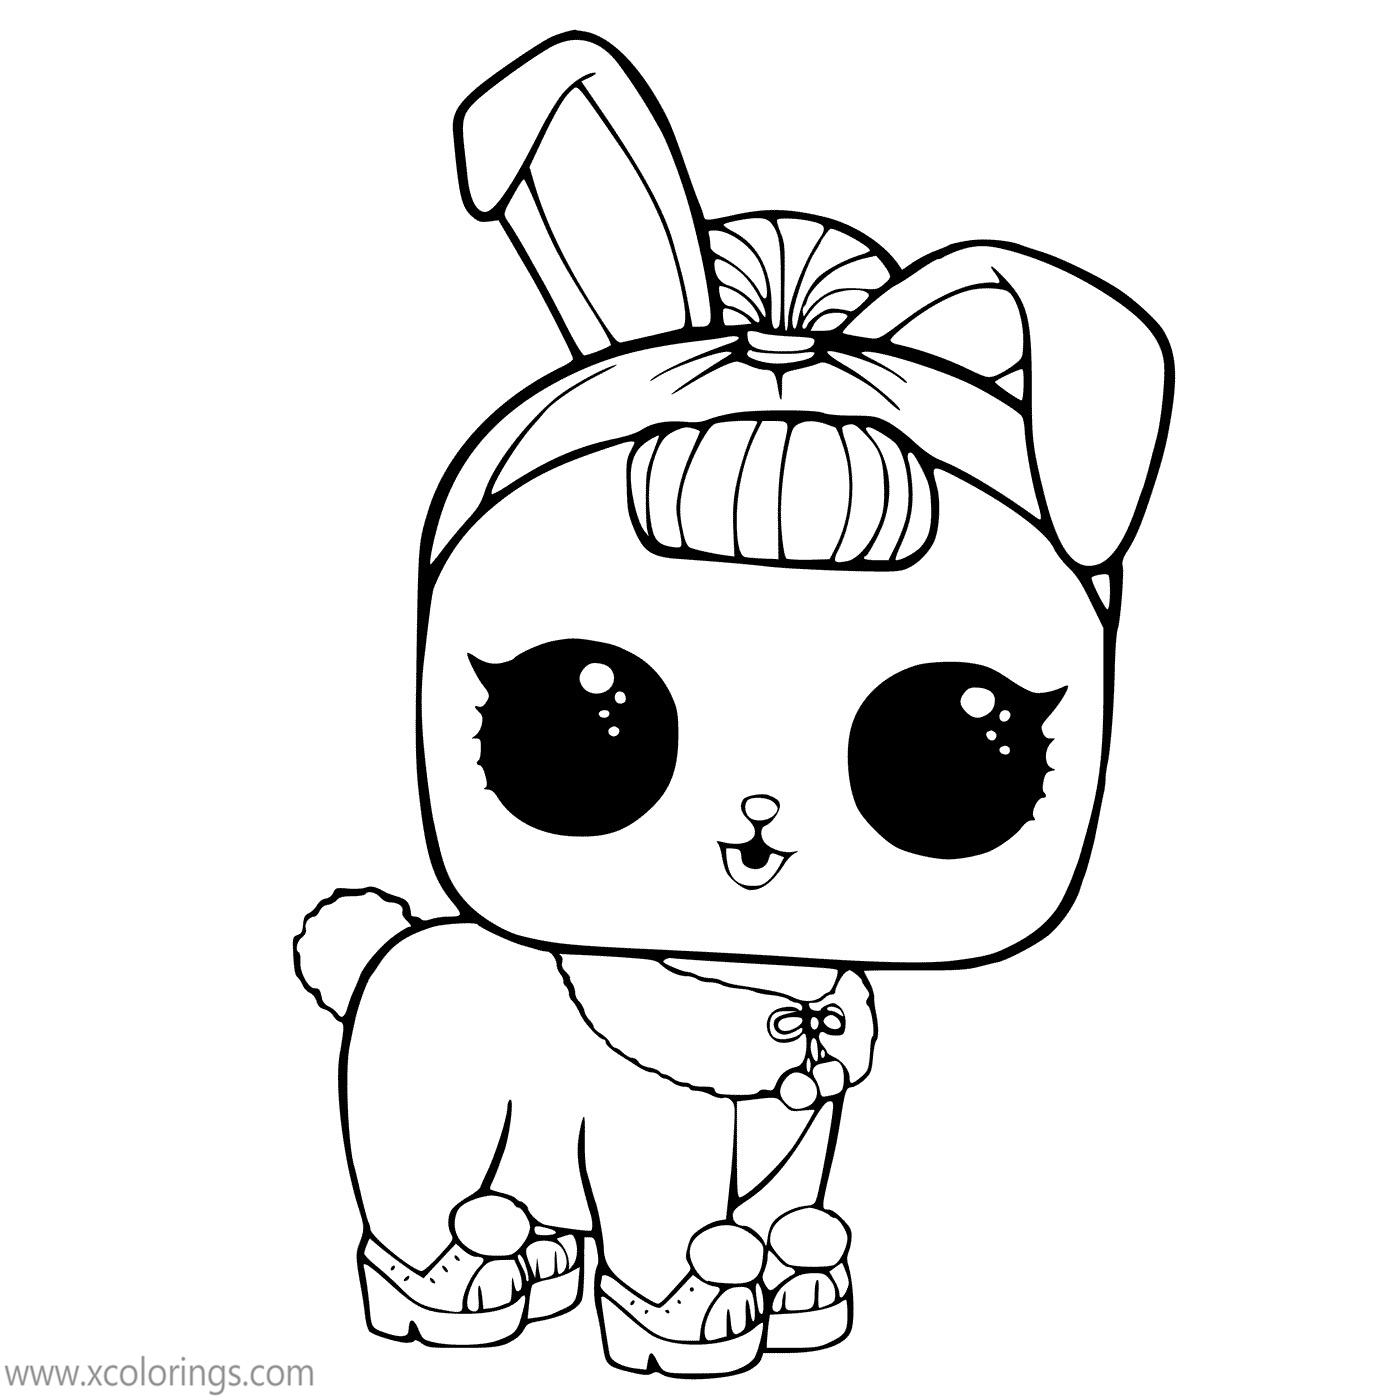 LOL Pets Coloring Pages Crystal Bunny - XColorings.com